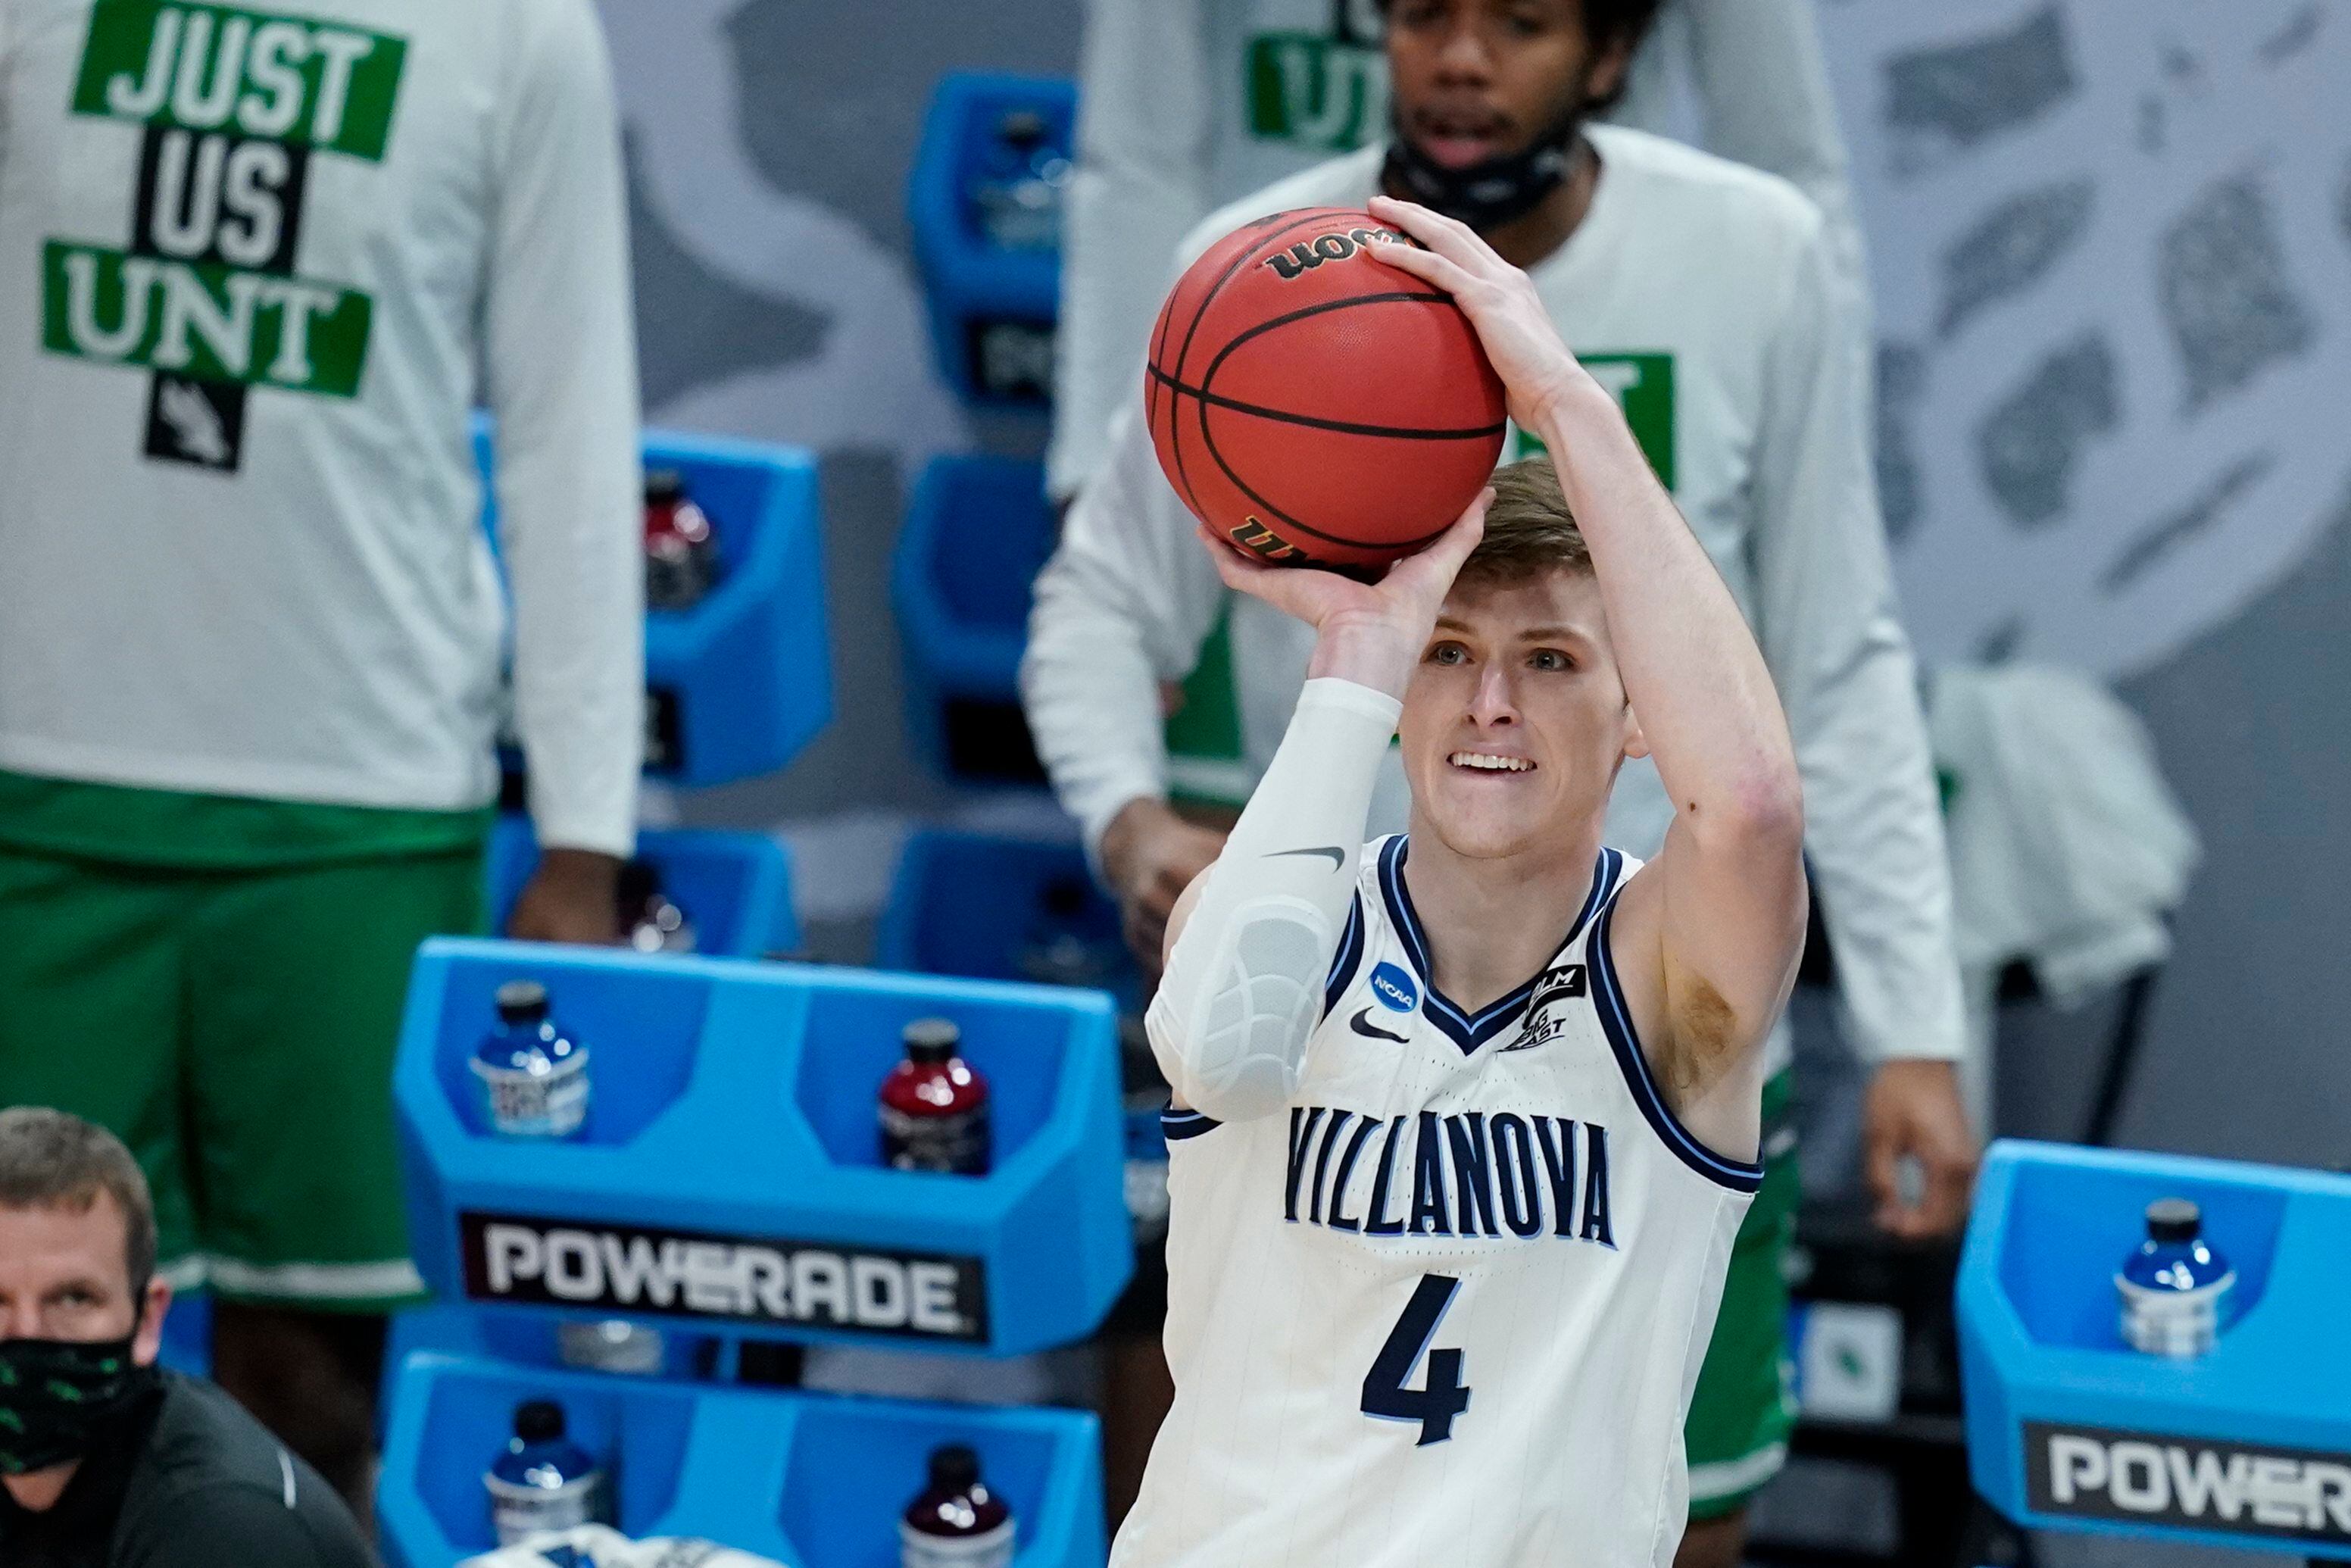 Chris Arcidiacono shows that hard work and patience pay off for Villanova